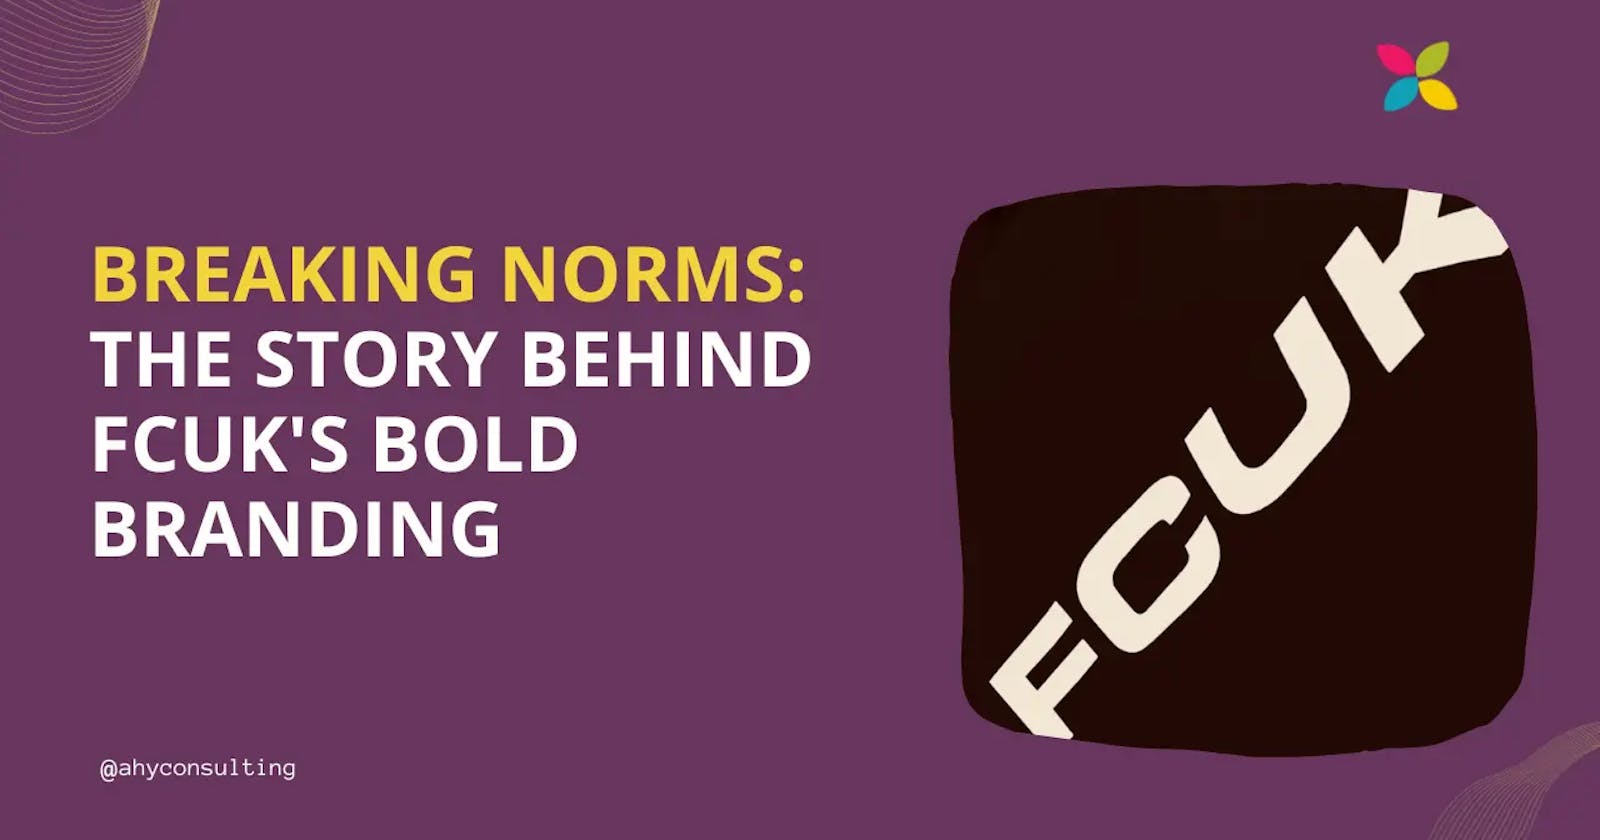 Breaking Norms: The Story Behind FCUK's Bold Branding